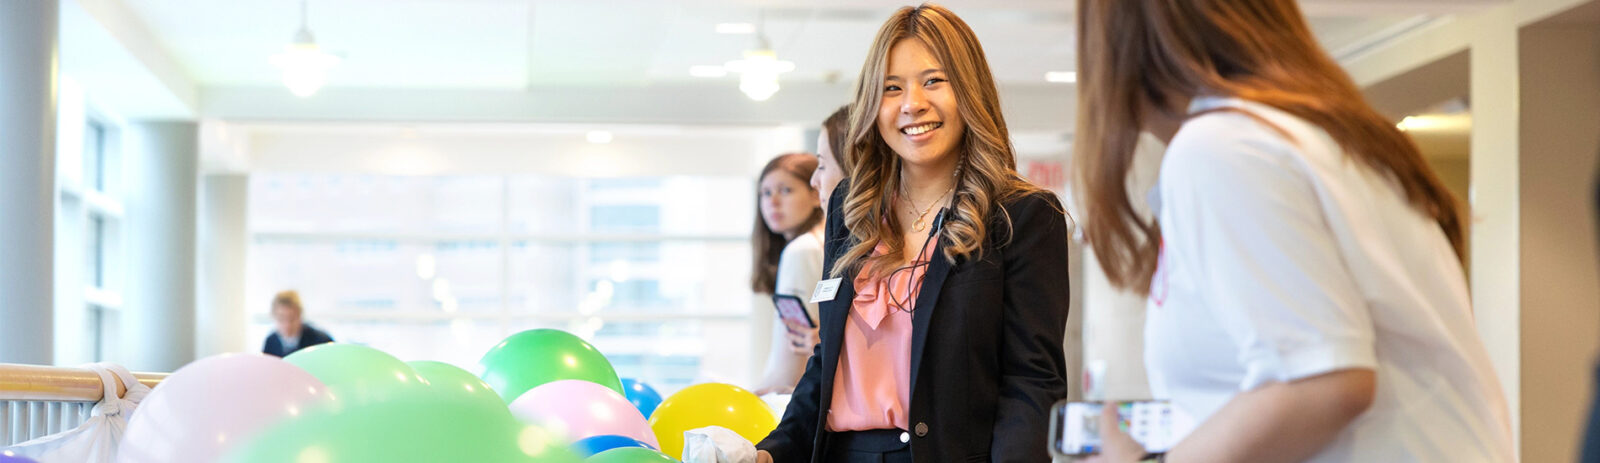 Woman in business attire with multicolored balloons.